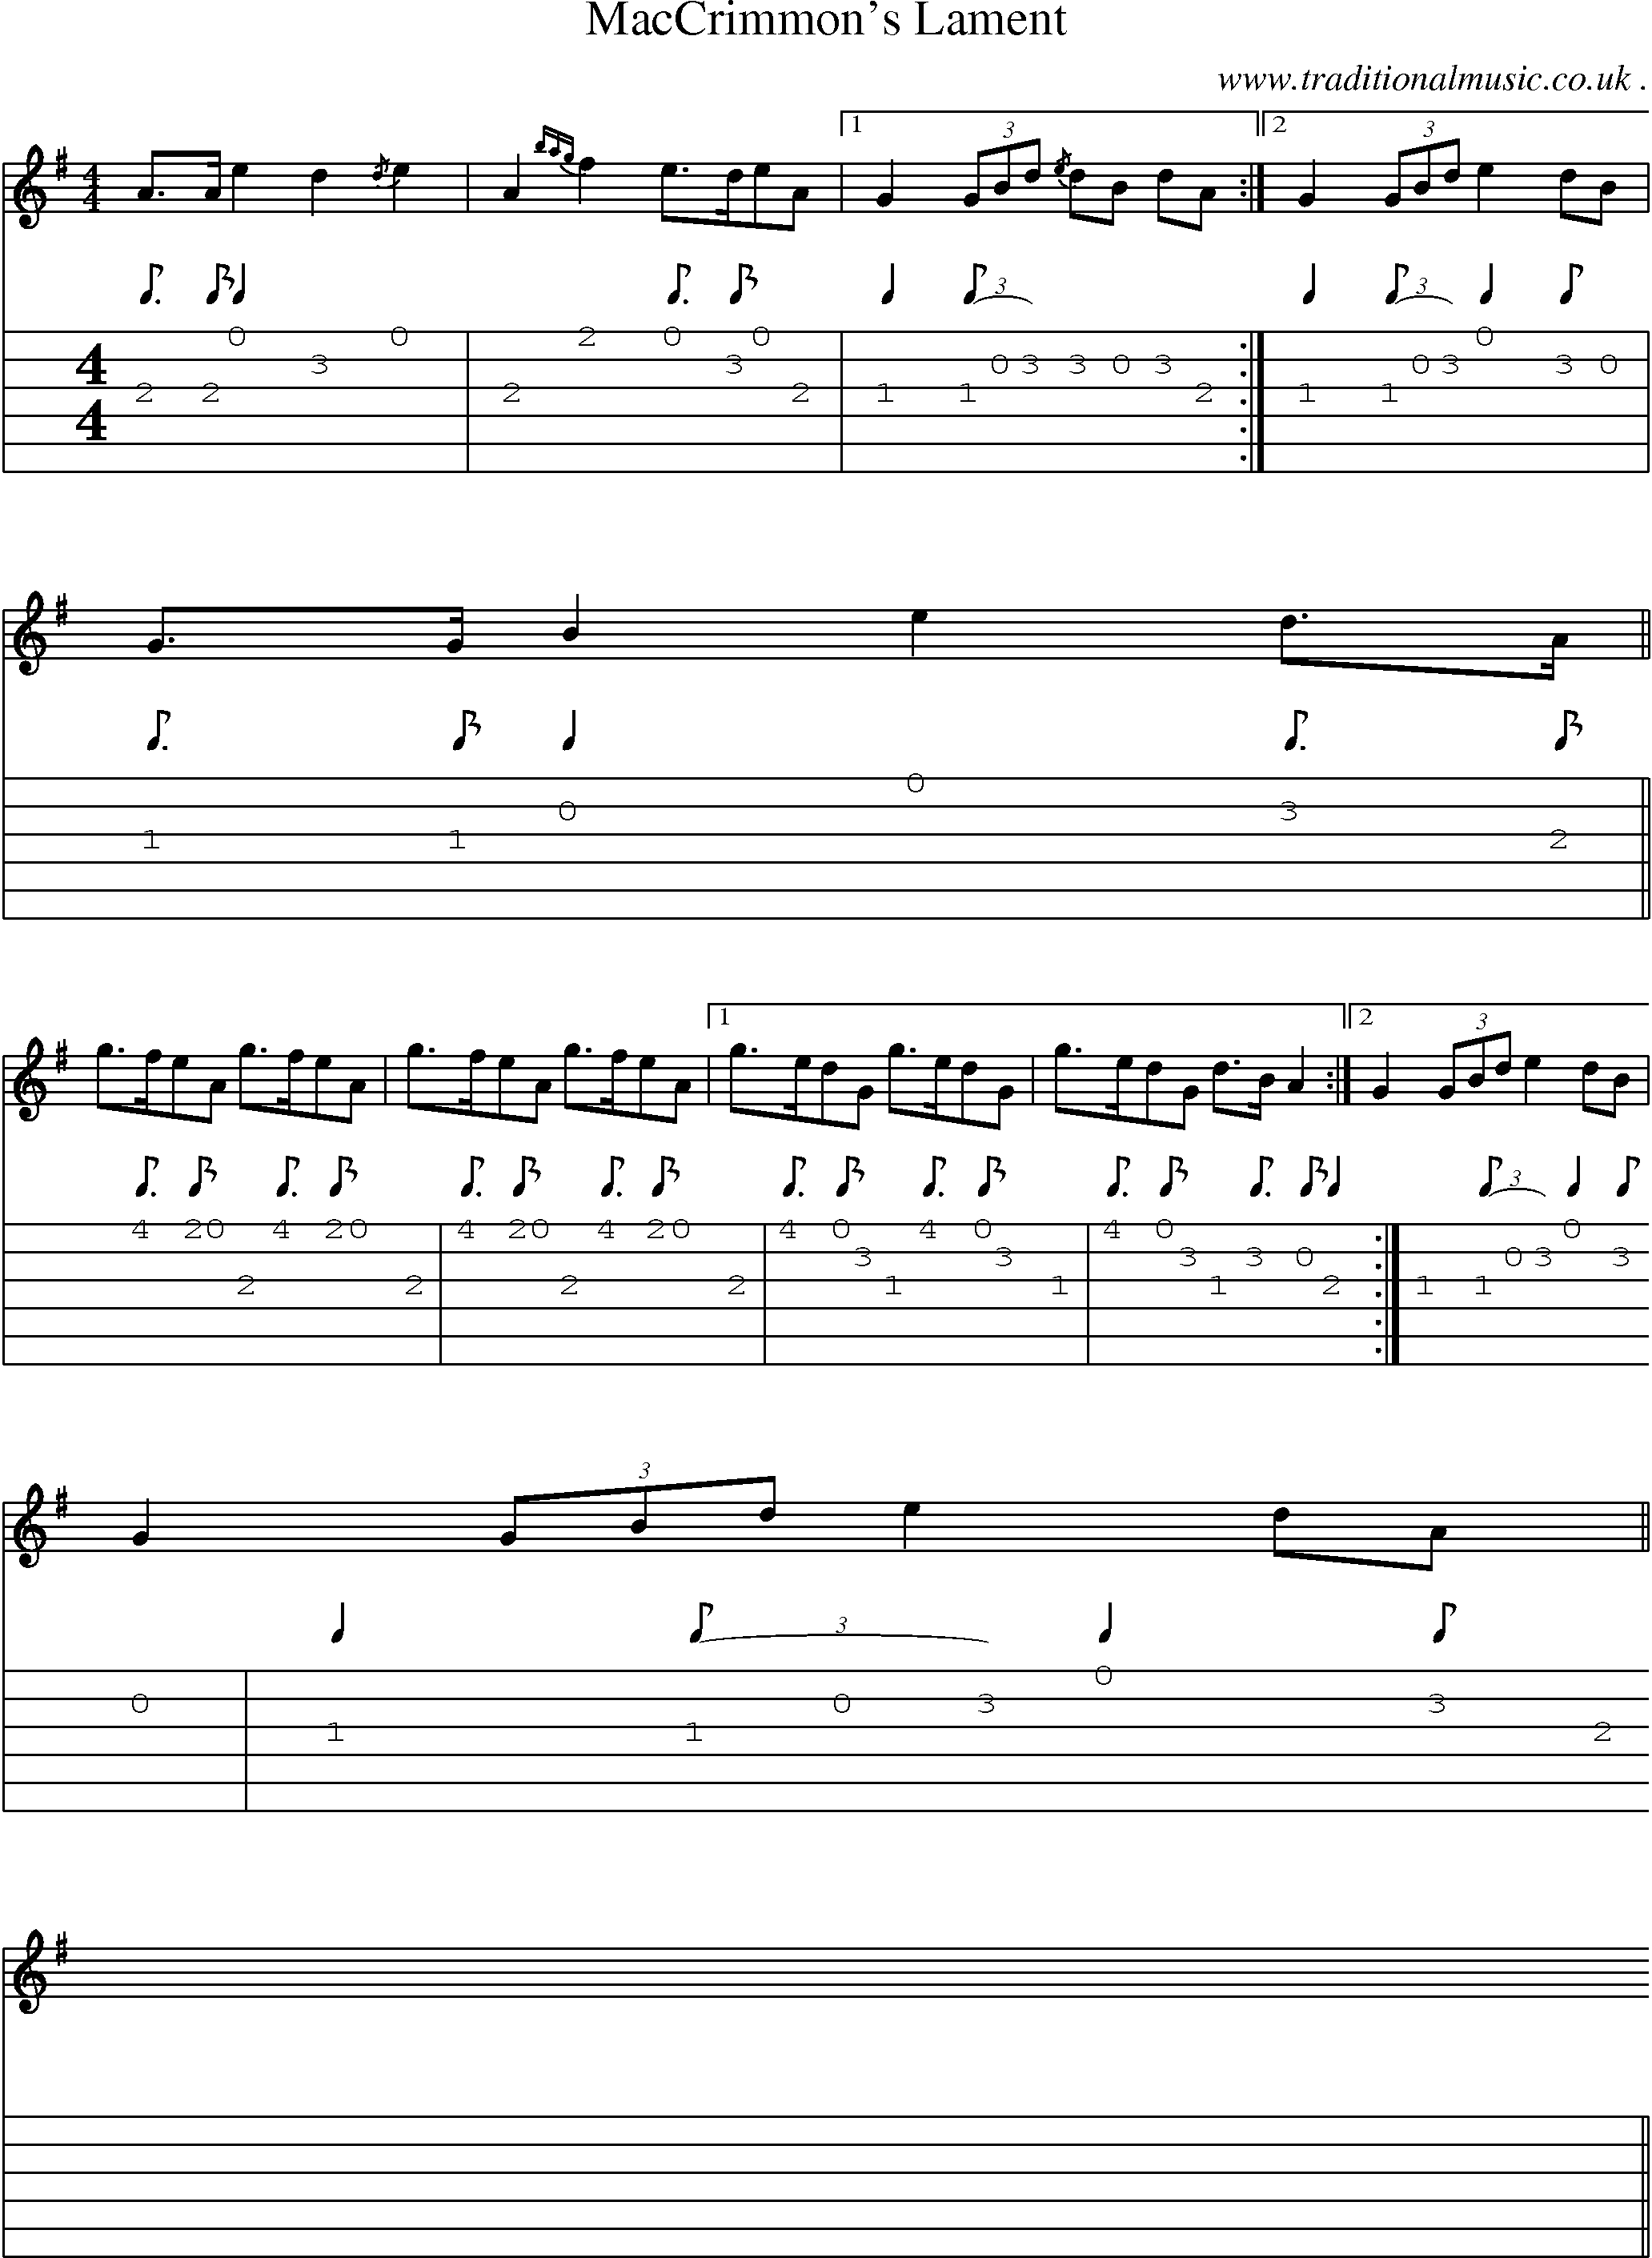 Sheet-music  score, Chords and Guitar Tabs for Maccrimmons Lament